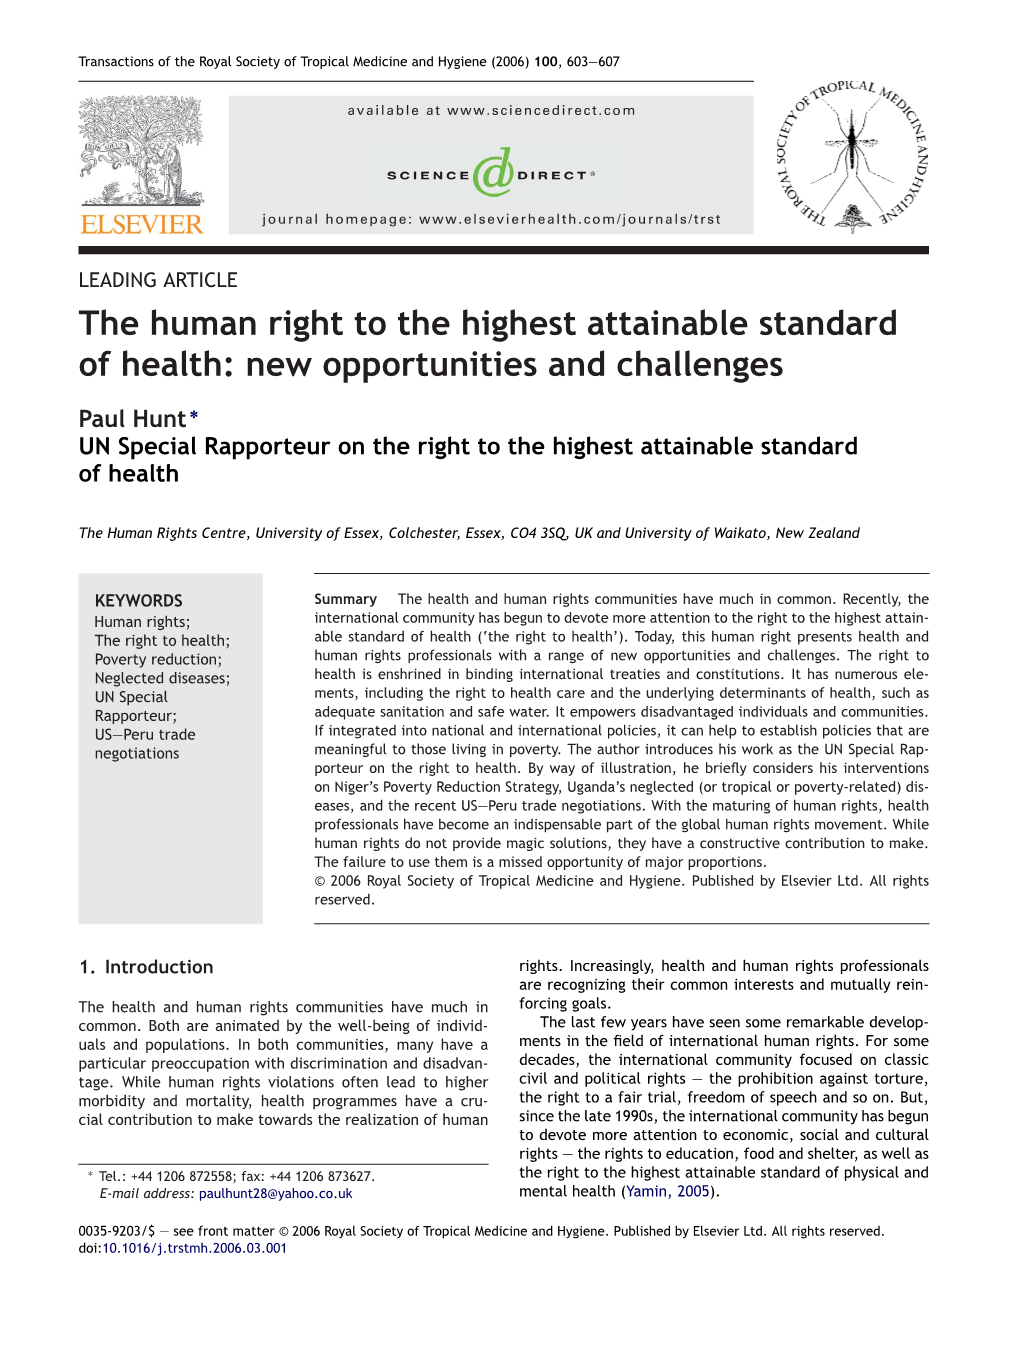 The Human Right to the Highest Attainable Standard of Health: New Opportunities and Challenges